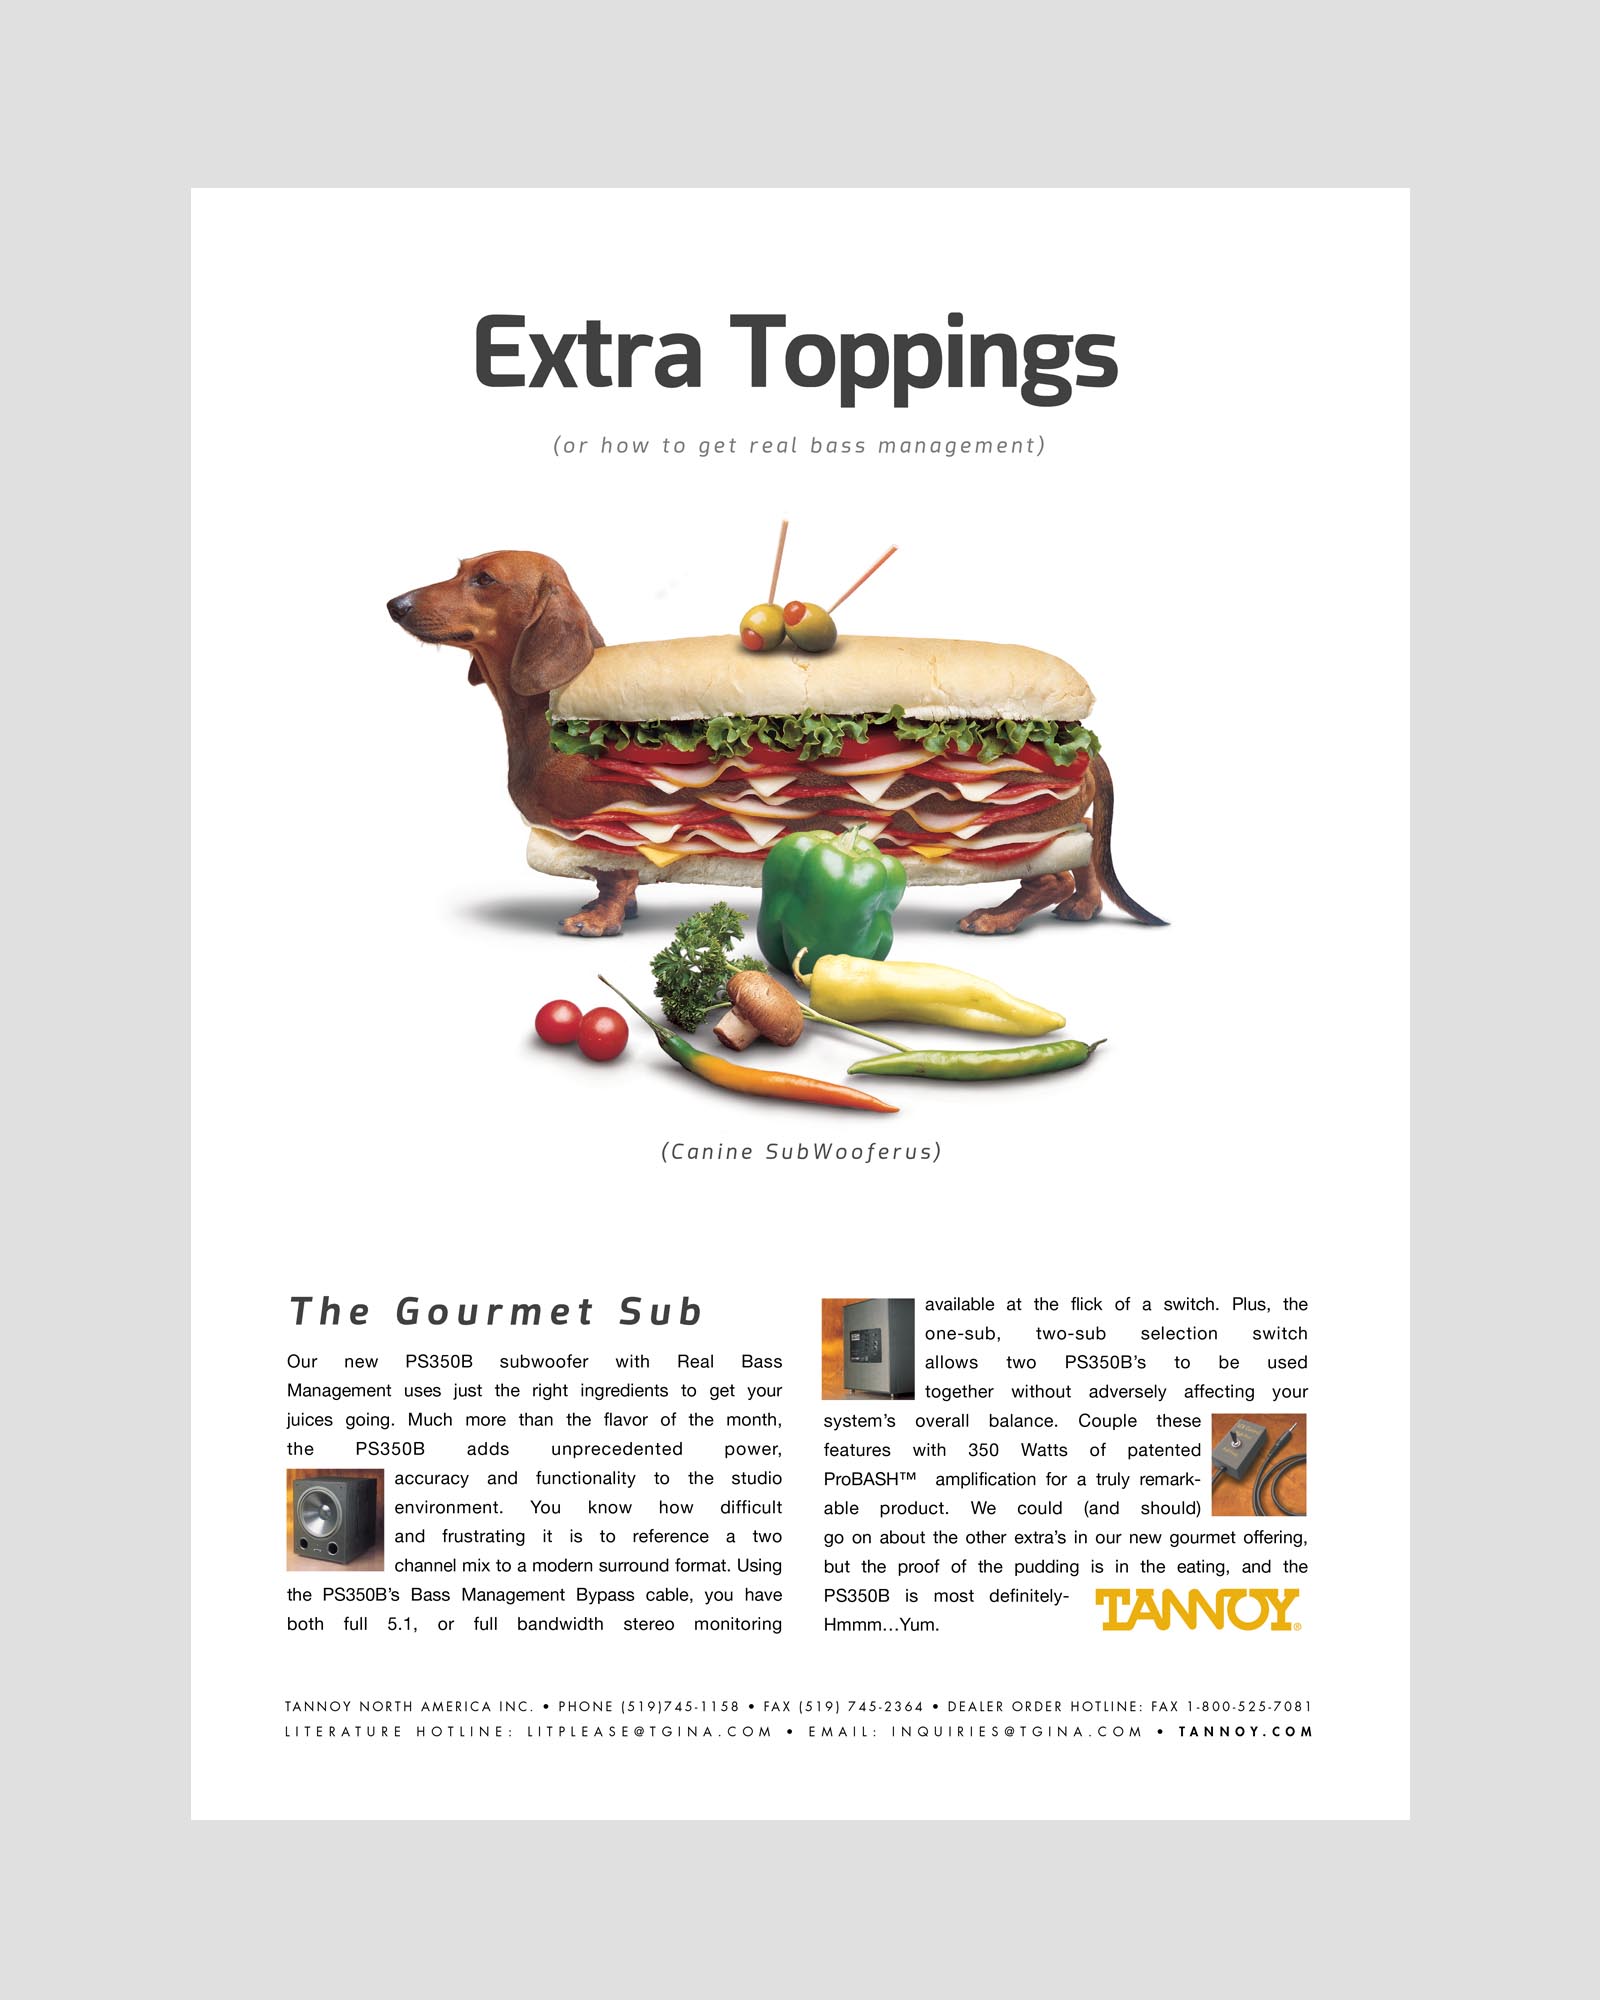 ip tannoy advertising photography dachshund ad by design direction ClarkMost